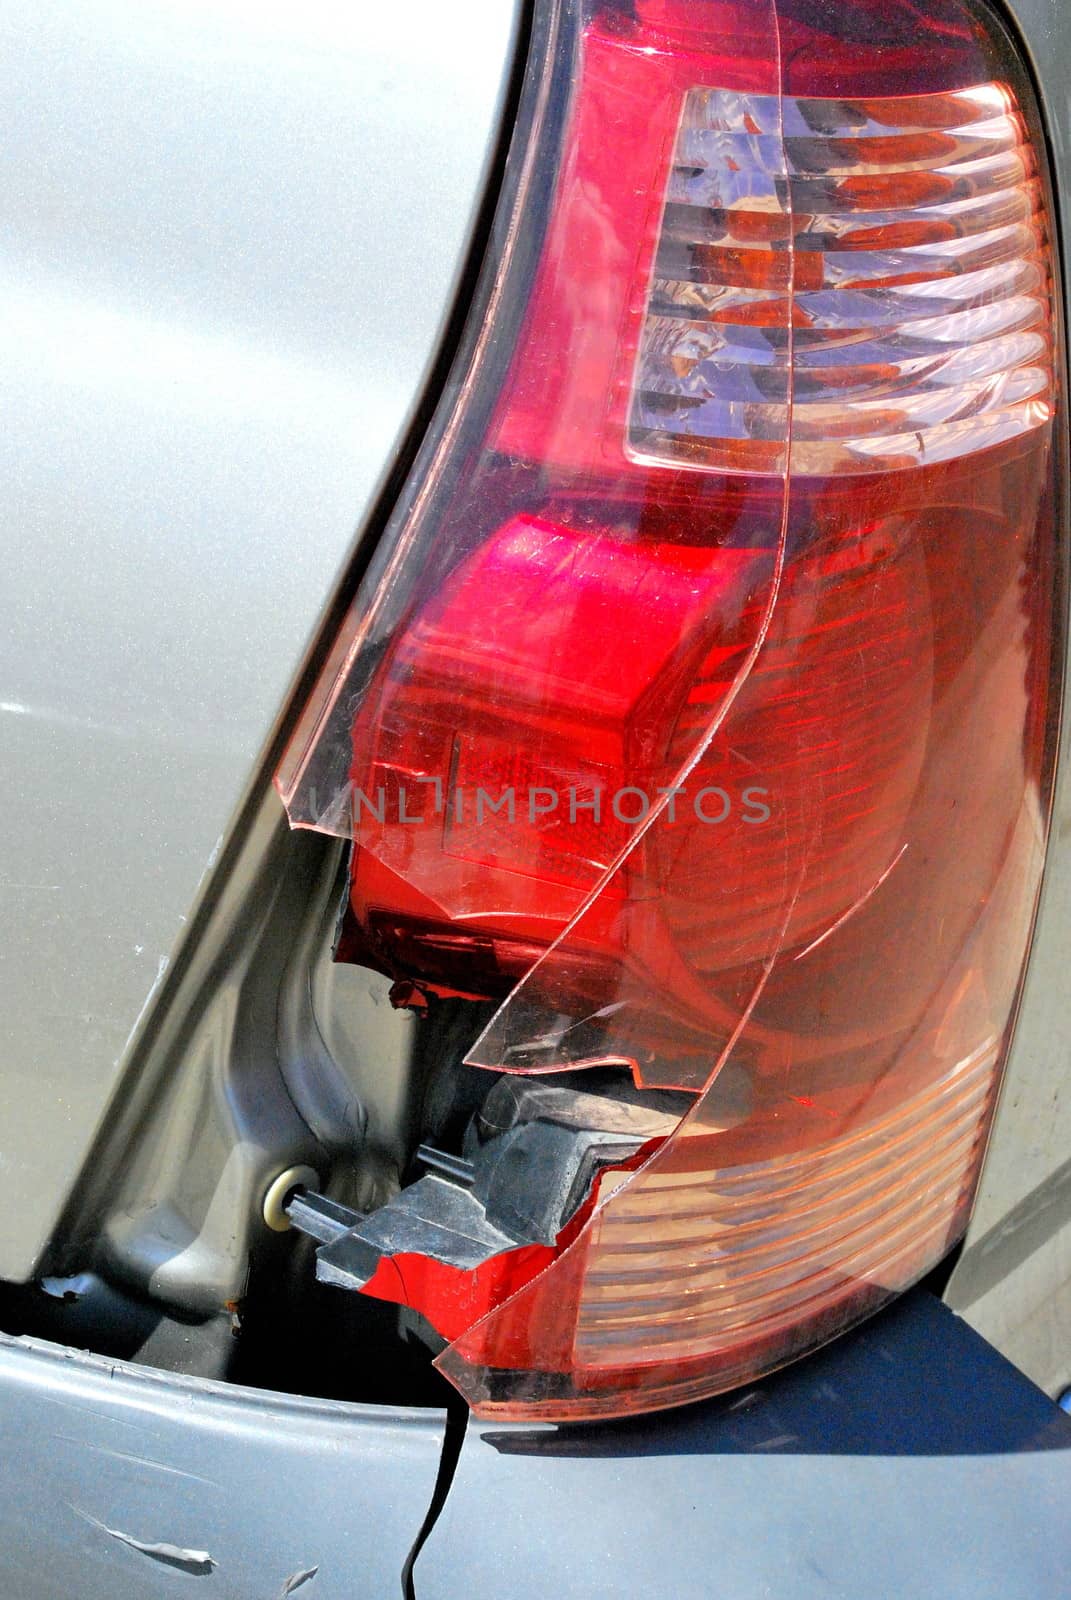 Broken tail light on a car from an accident.